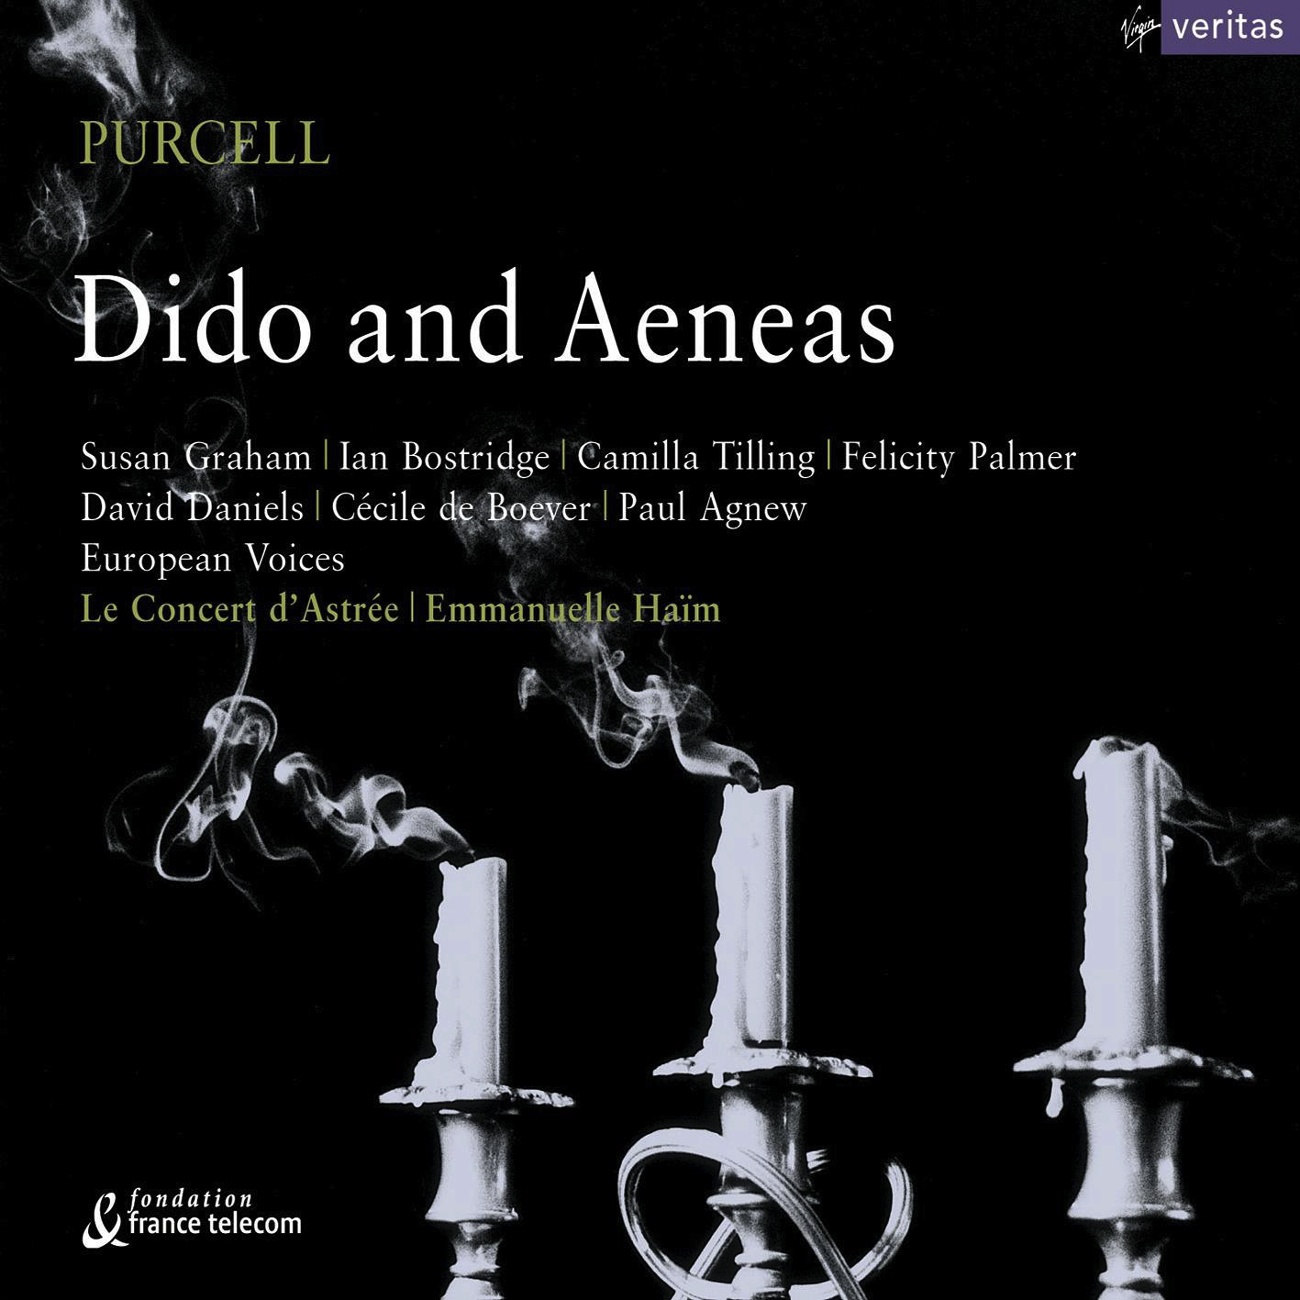 Dido and Aeneas, ACT 1: Scene: The Palast: Shake the Clouds from off your Brow (Belinda)